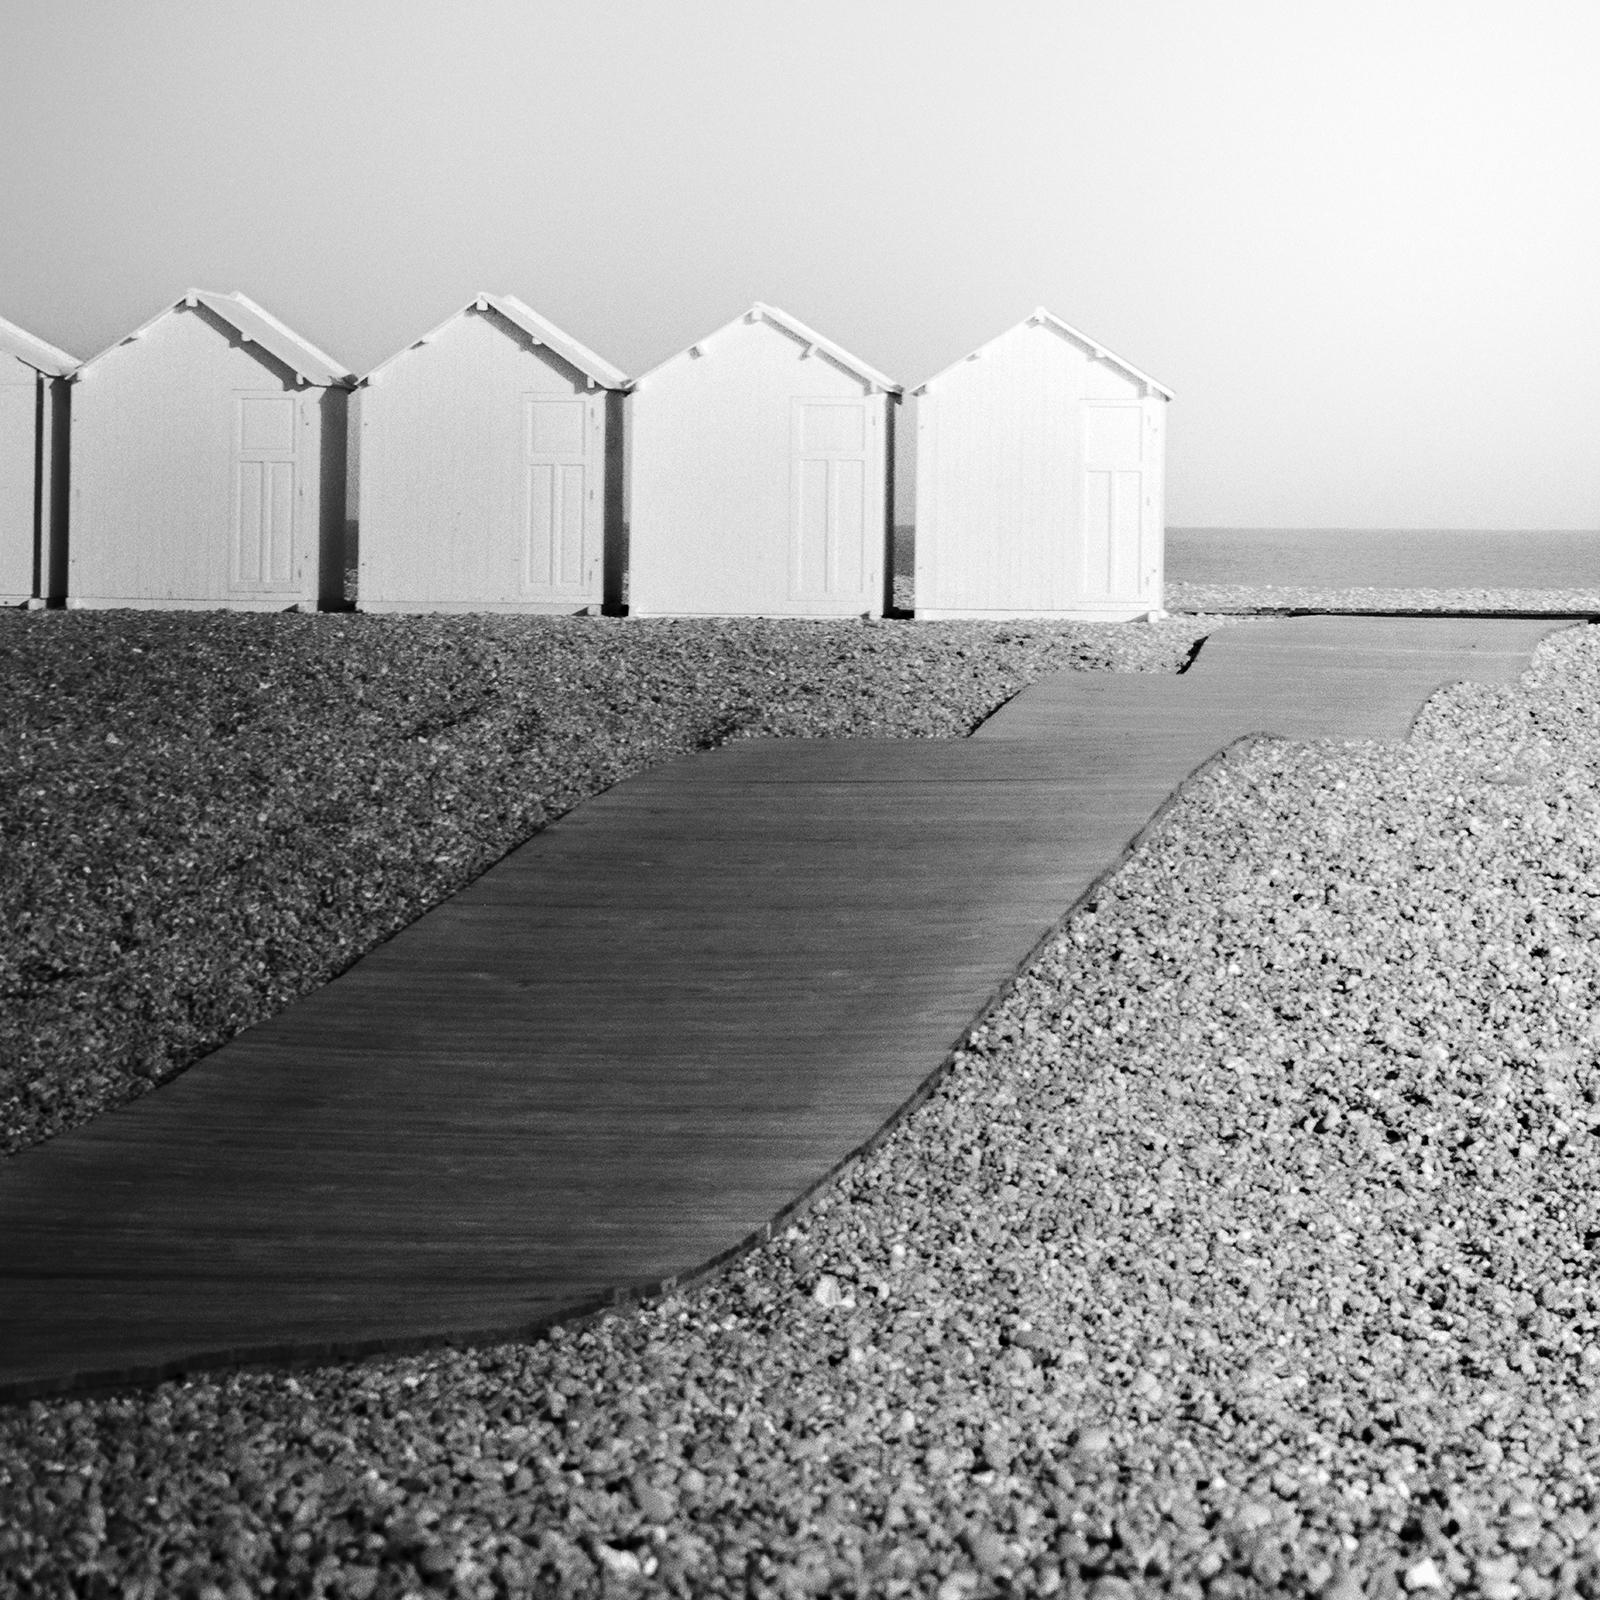 Wood Huts, Promenade, Rocky Beach, France, black and white landscape photography For Sale 3